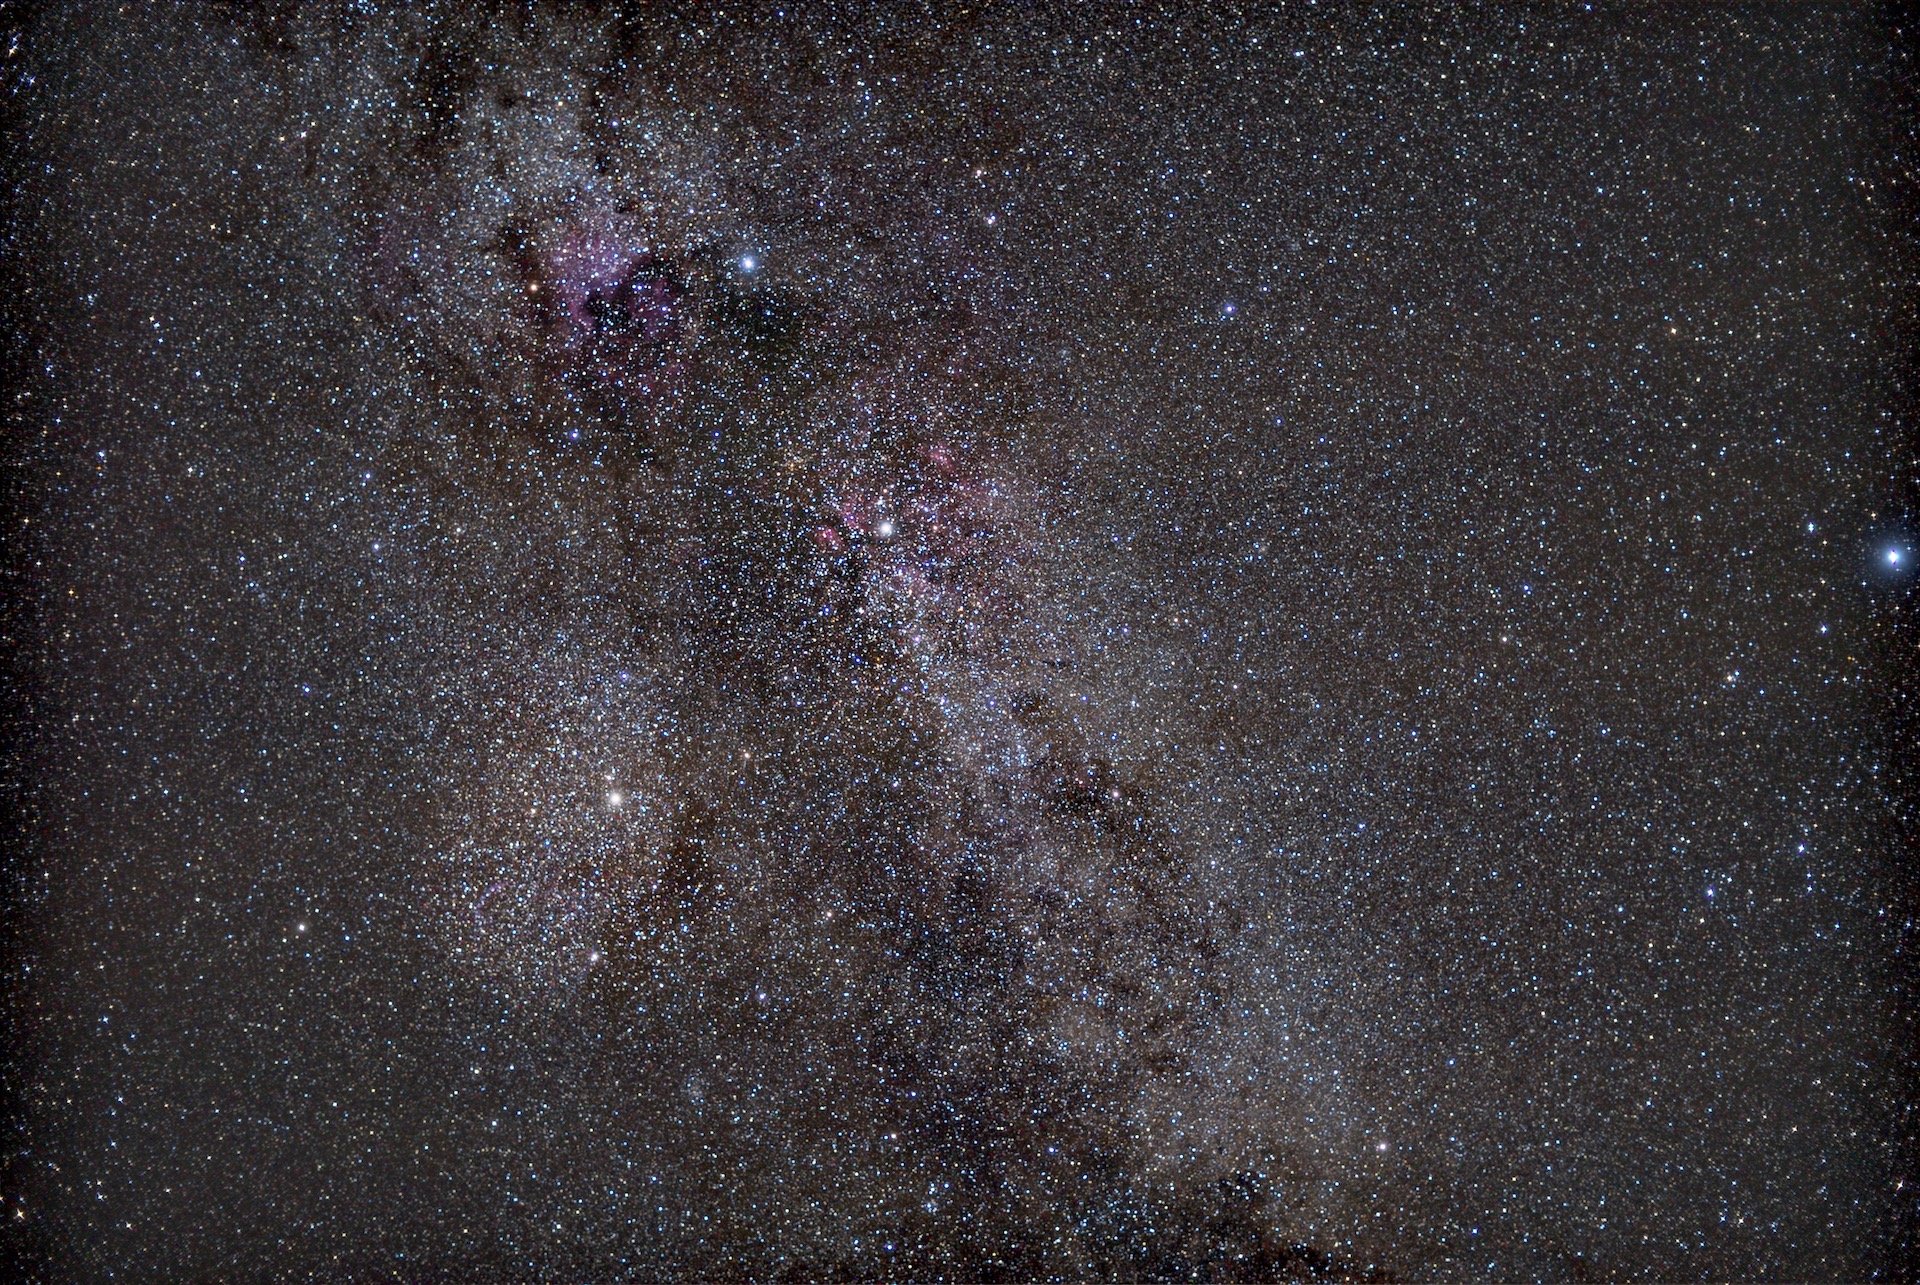 Summer Milky Way in the constellation Cygnus with countless deep sky objects. Exposure 50x60 seconds, stacking with Sequator, and image editing with Adobe Photoshop. Photo: Marcus Schenk and Sebastian Brummer